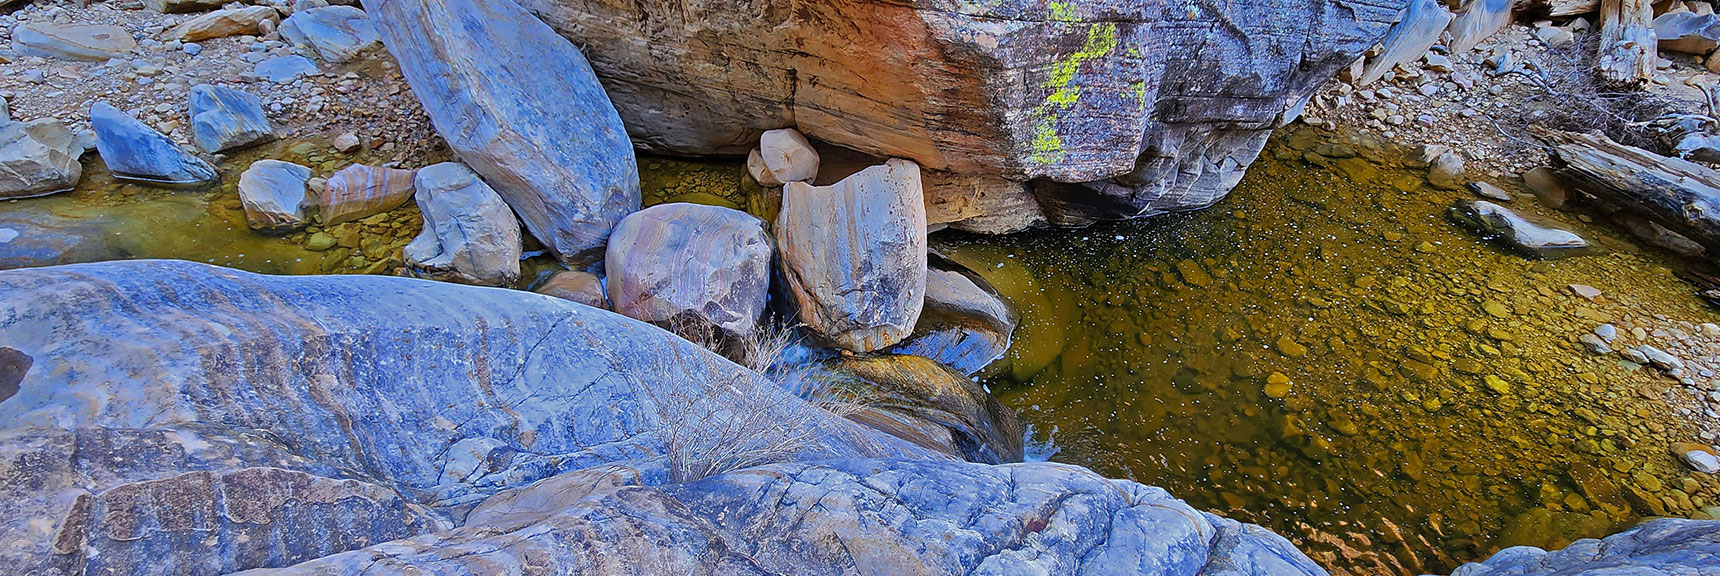 Another Look Over the Approach Ledge Down into the Pool Below | Ice Box Canyon | Red Rock Canyon NCA, Nevada | Las Vegas Area Trails | David Smith